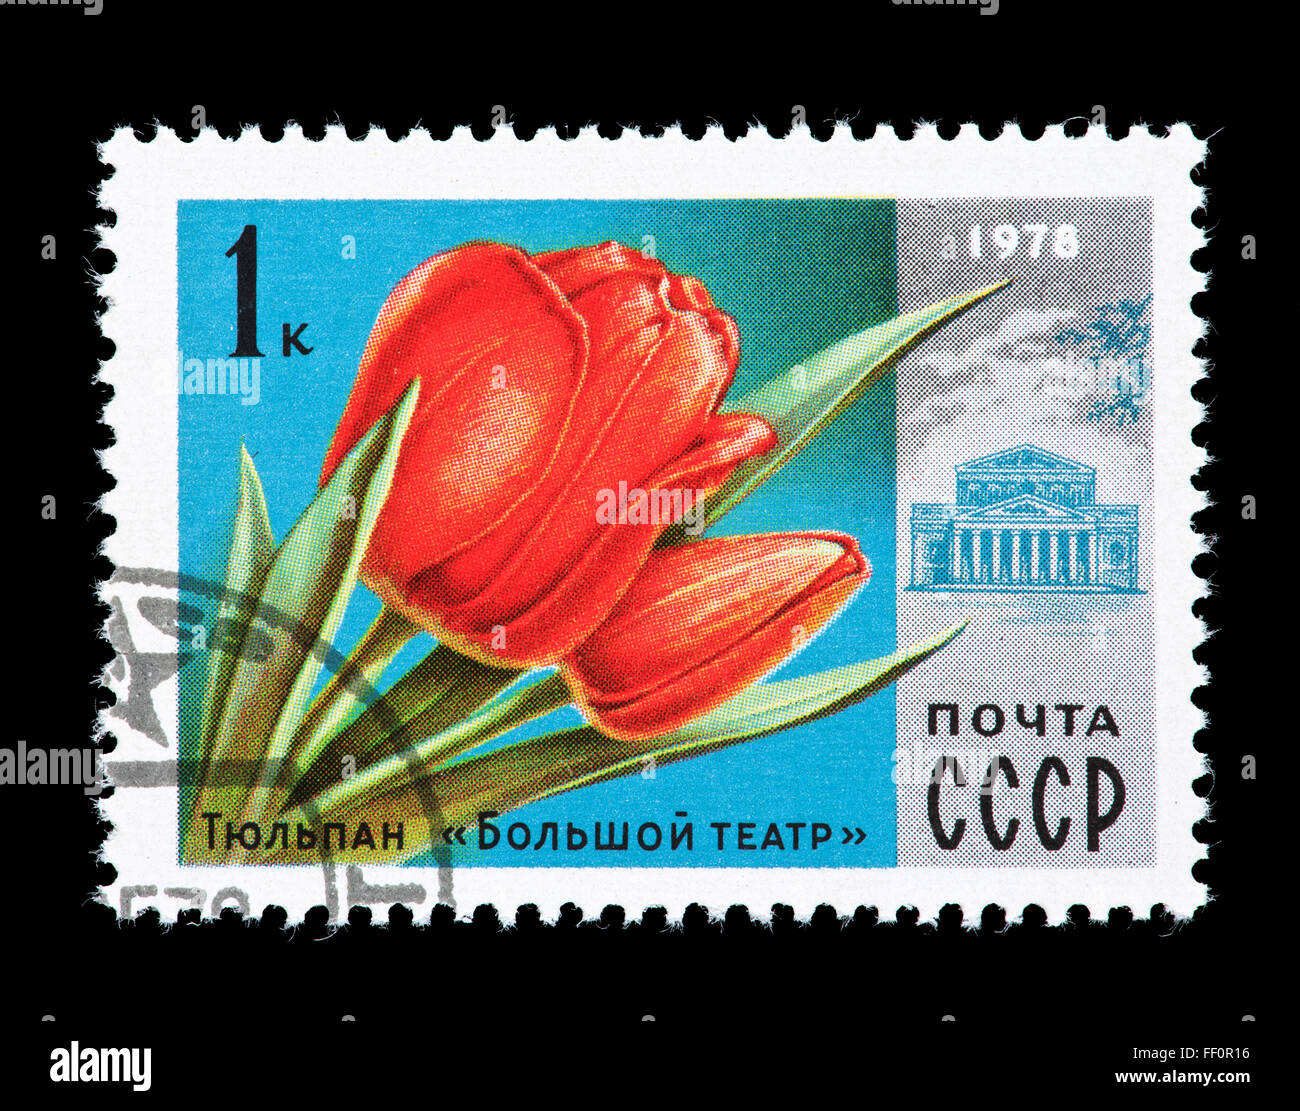 Postage stamp from the Soviet Union depicting tulips and the Bolshoi Theater building Stock Photo